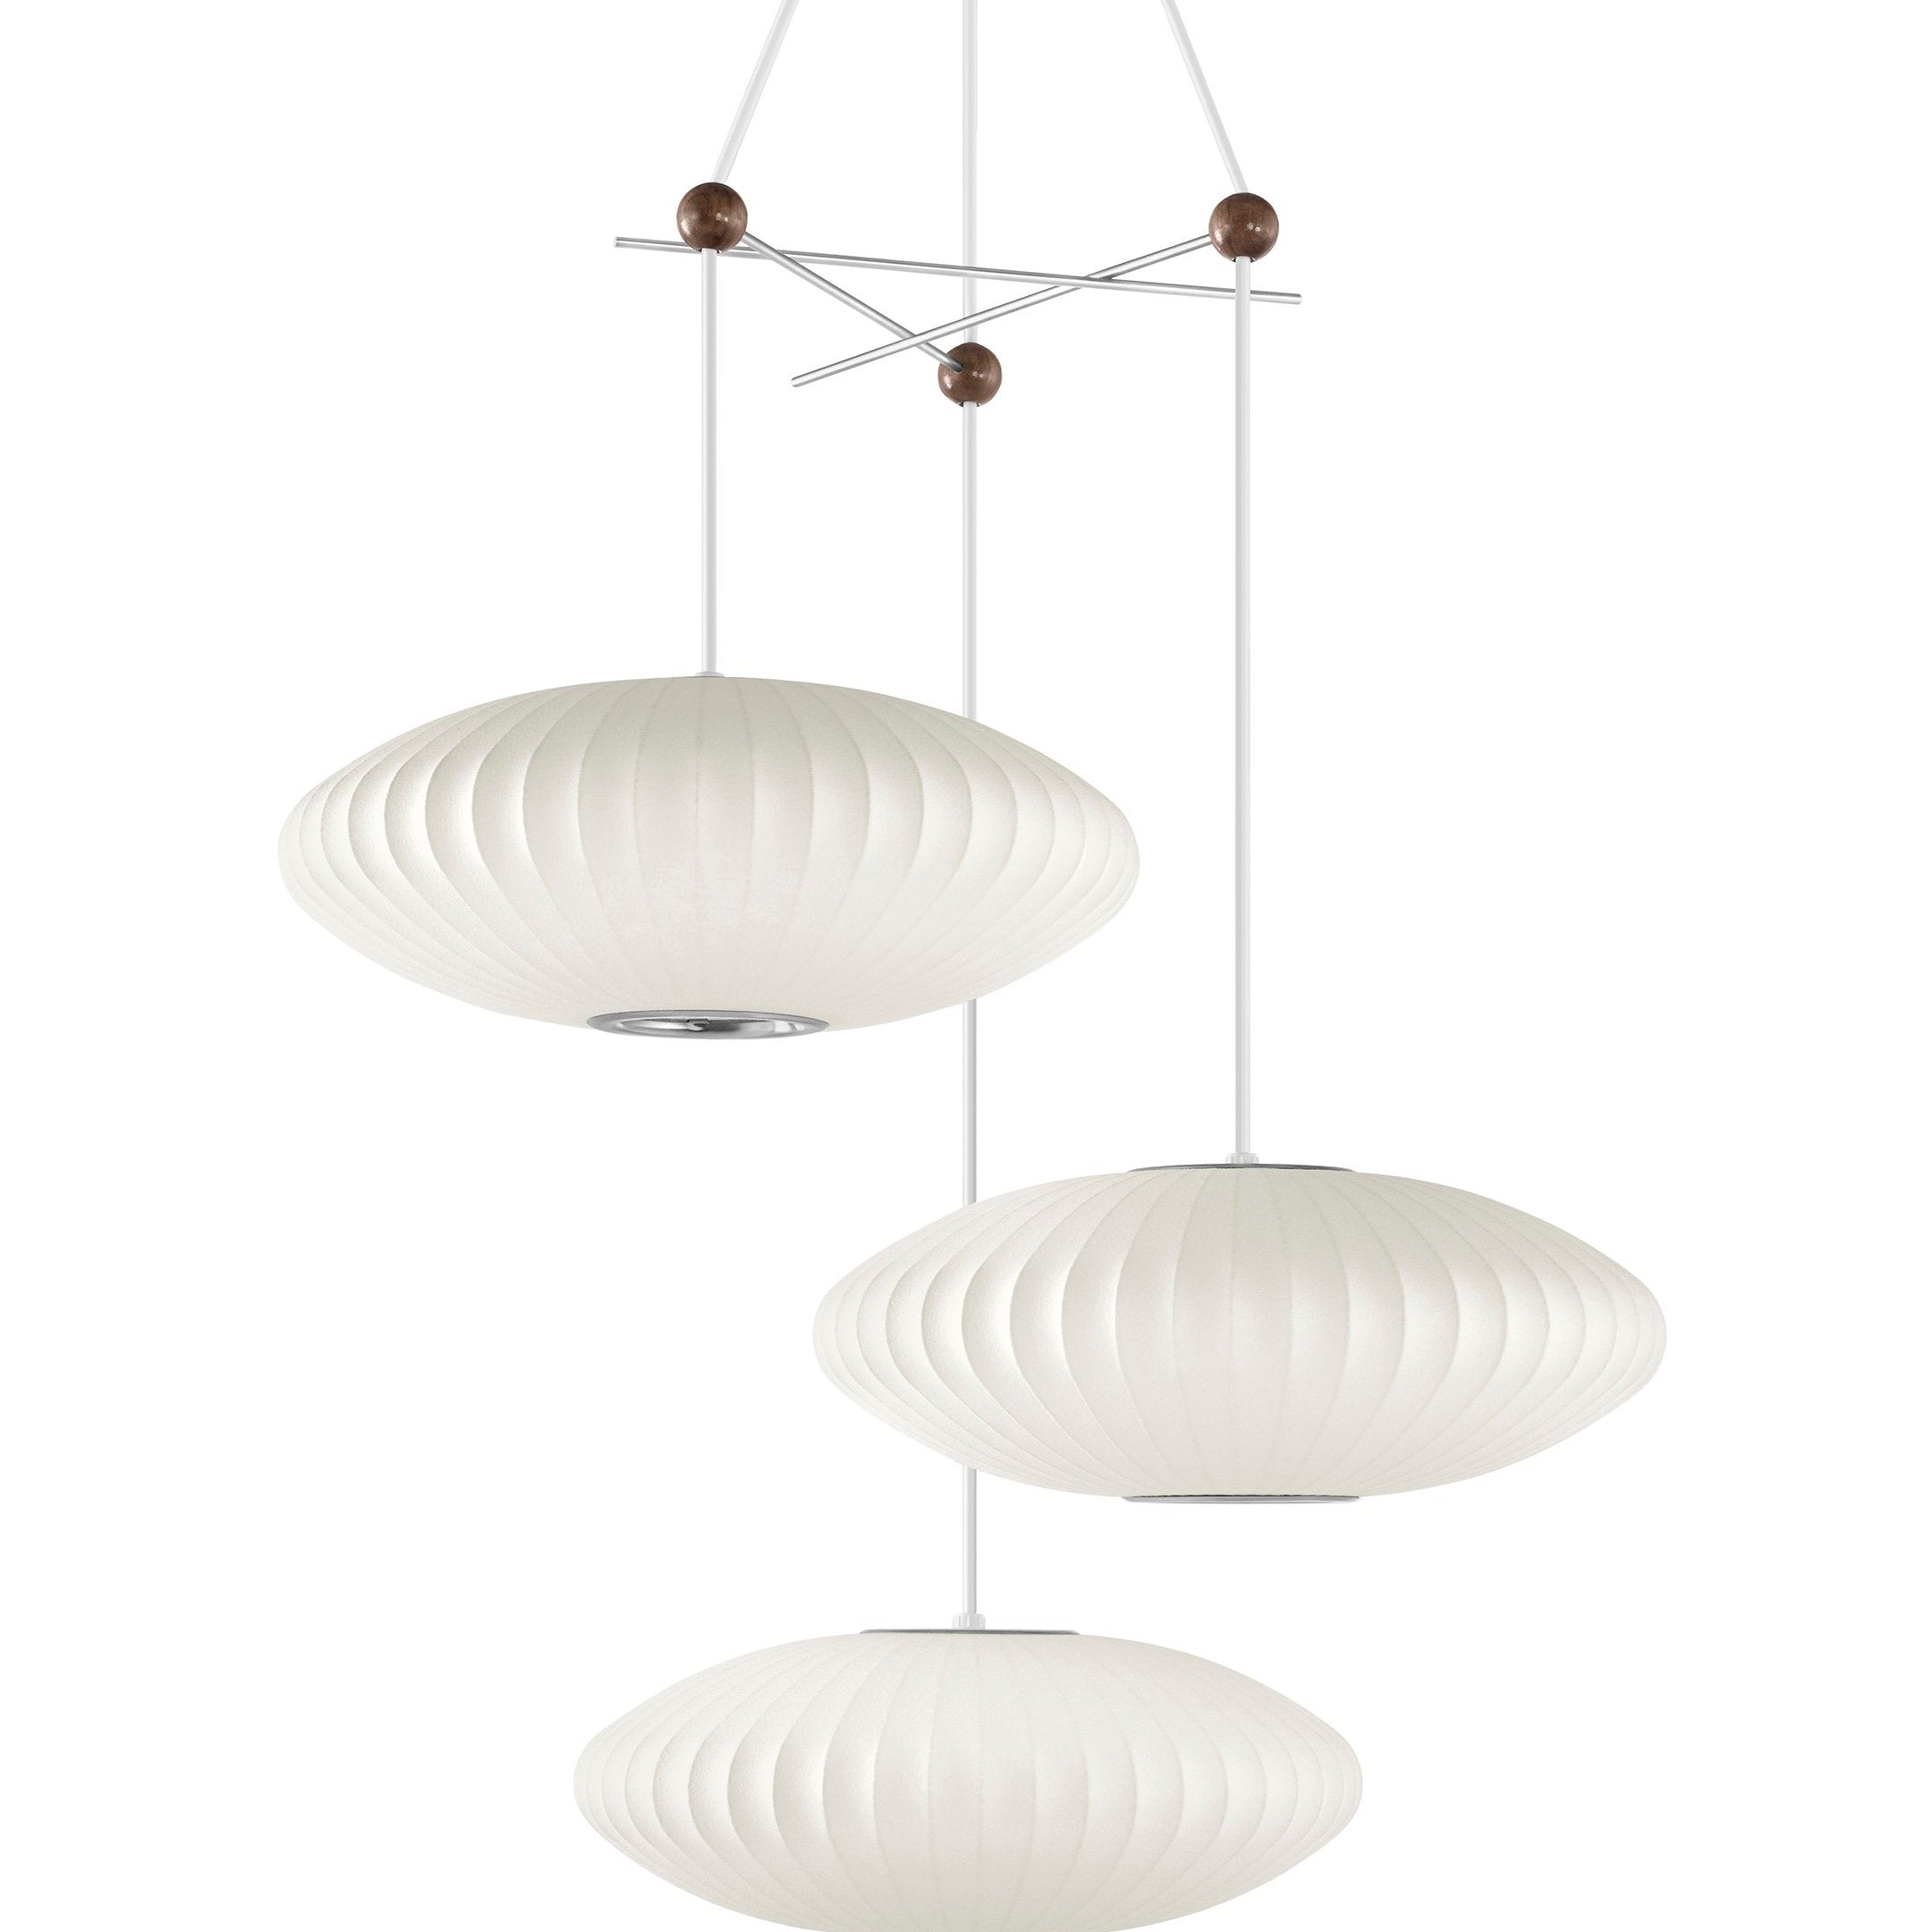 The Nelson Triple Bubble Lamp Fixture by George Nelson for Herman Miller is the  perfect solution to hang your three favorite Bubble Pendants from the designer's Bubble Lamp Series. The fixture is made up of three crossing metal rods fused together with wooden spheres to create a playful display for illumination in a space. Each Bubble lamp can be installed with up to nineteen inches of diameter. Fixture only, pendants sold separately.